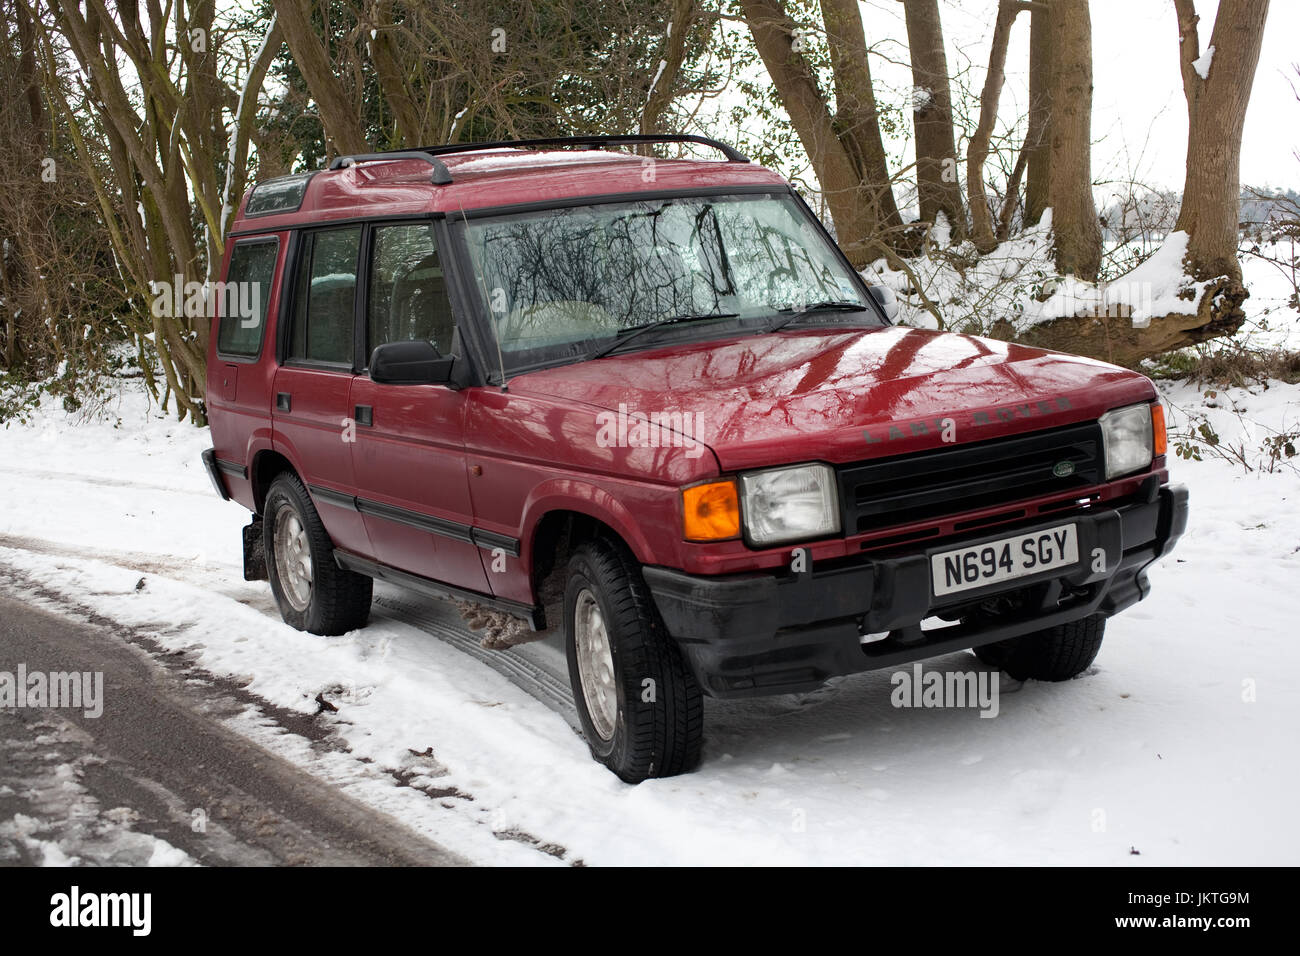 Land Rover Discovery in snow at side of road Stock Photo